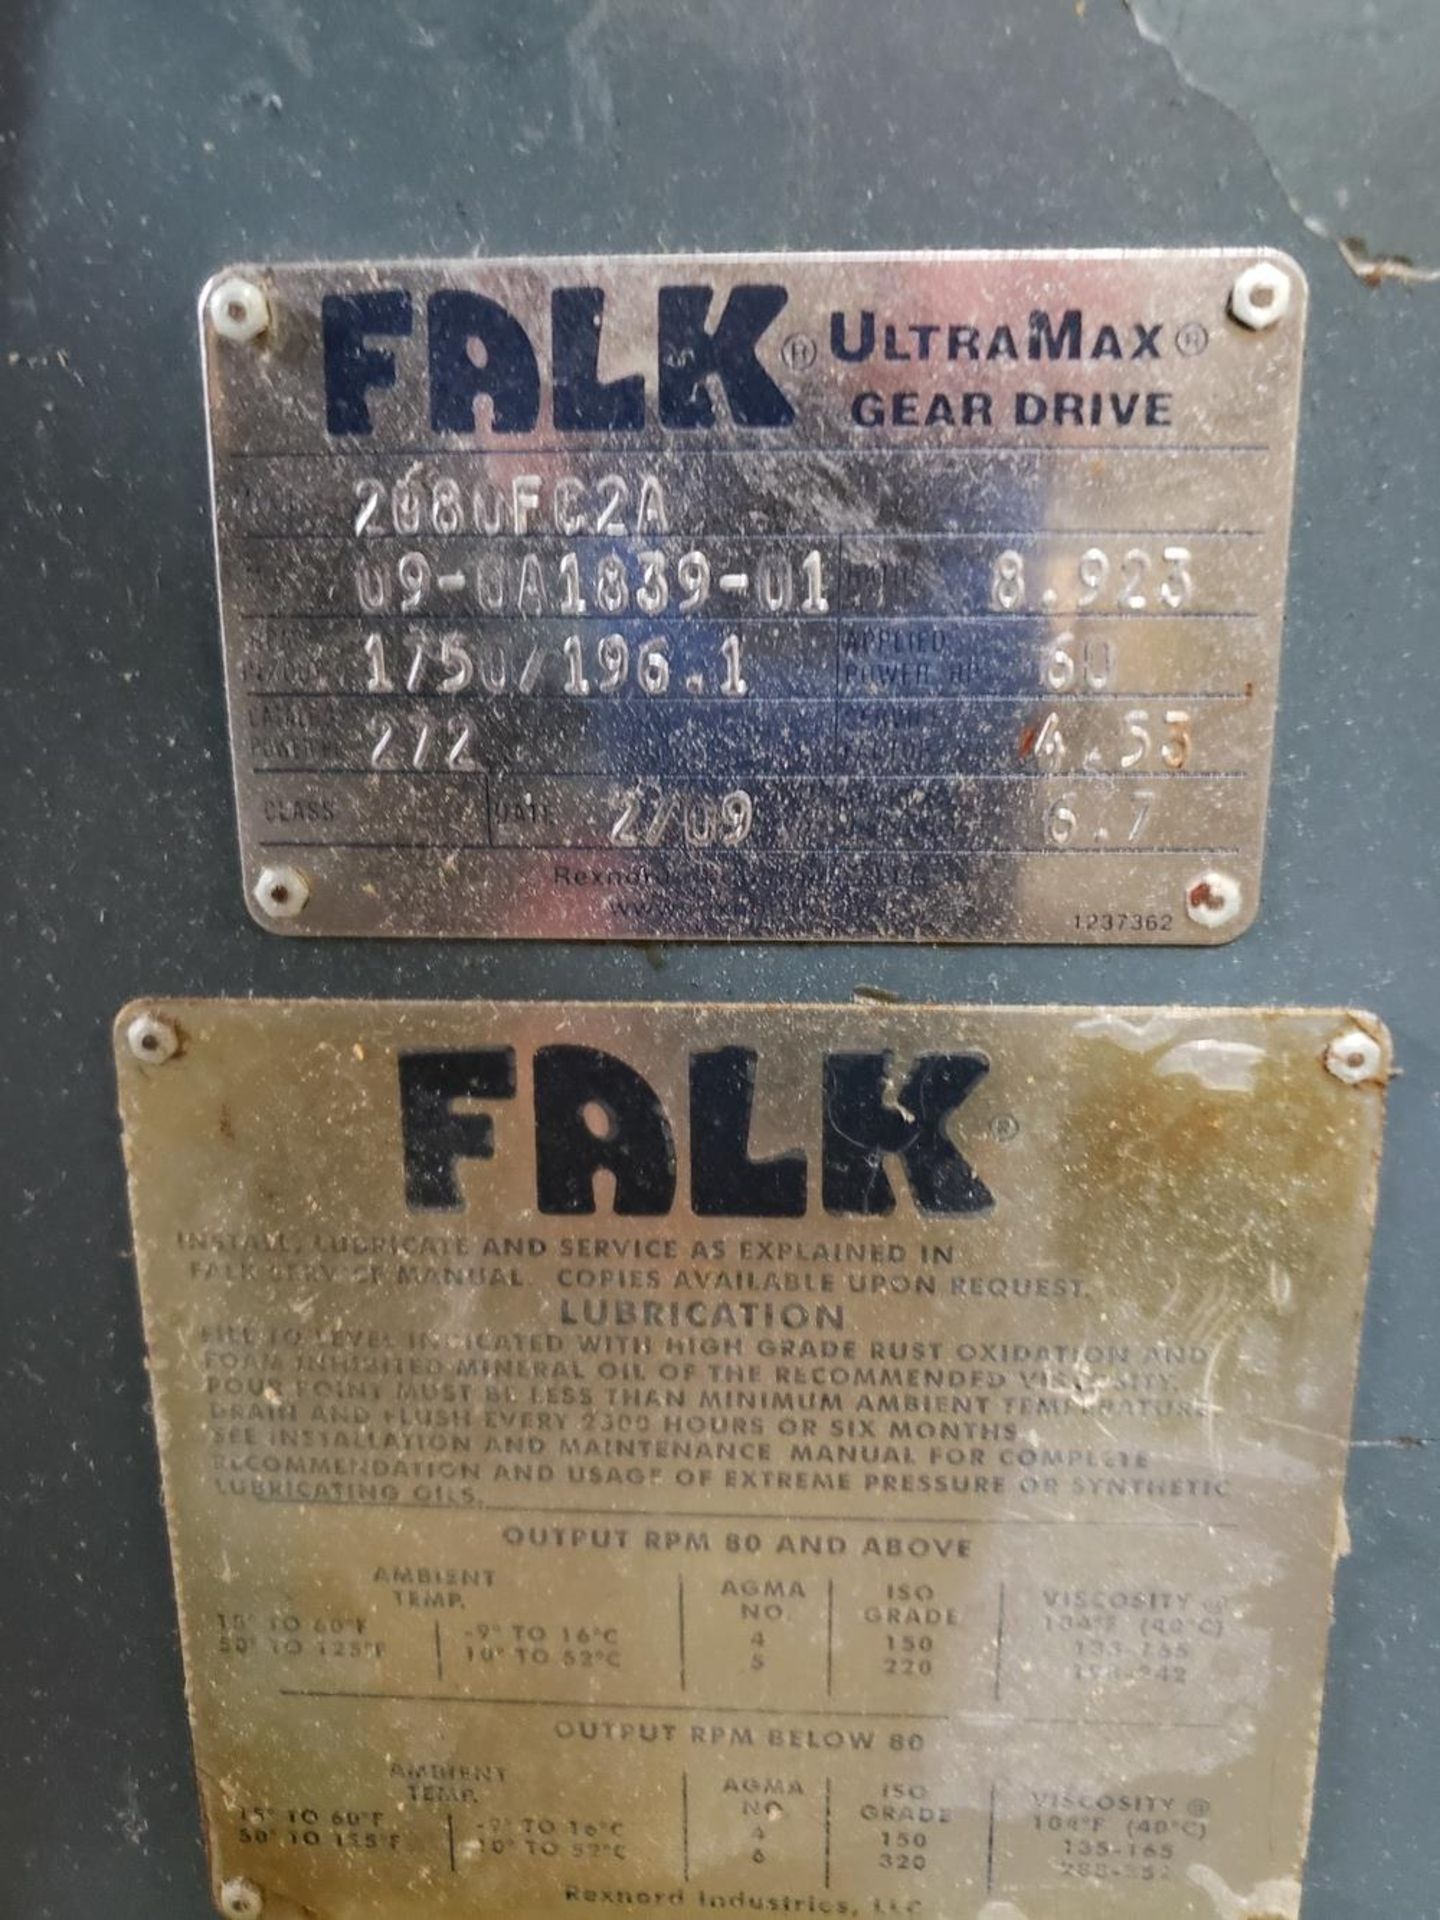 Falk Gear Drive , M# 208UFC2A - Subject to Bulk Bid Lot 884B -The Greater of the Ag | Rig Fee: $100 - Image 2 of 2